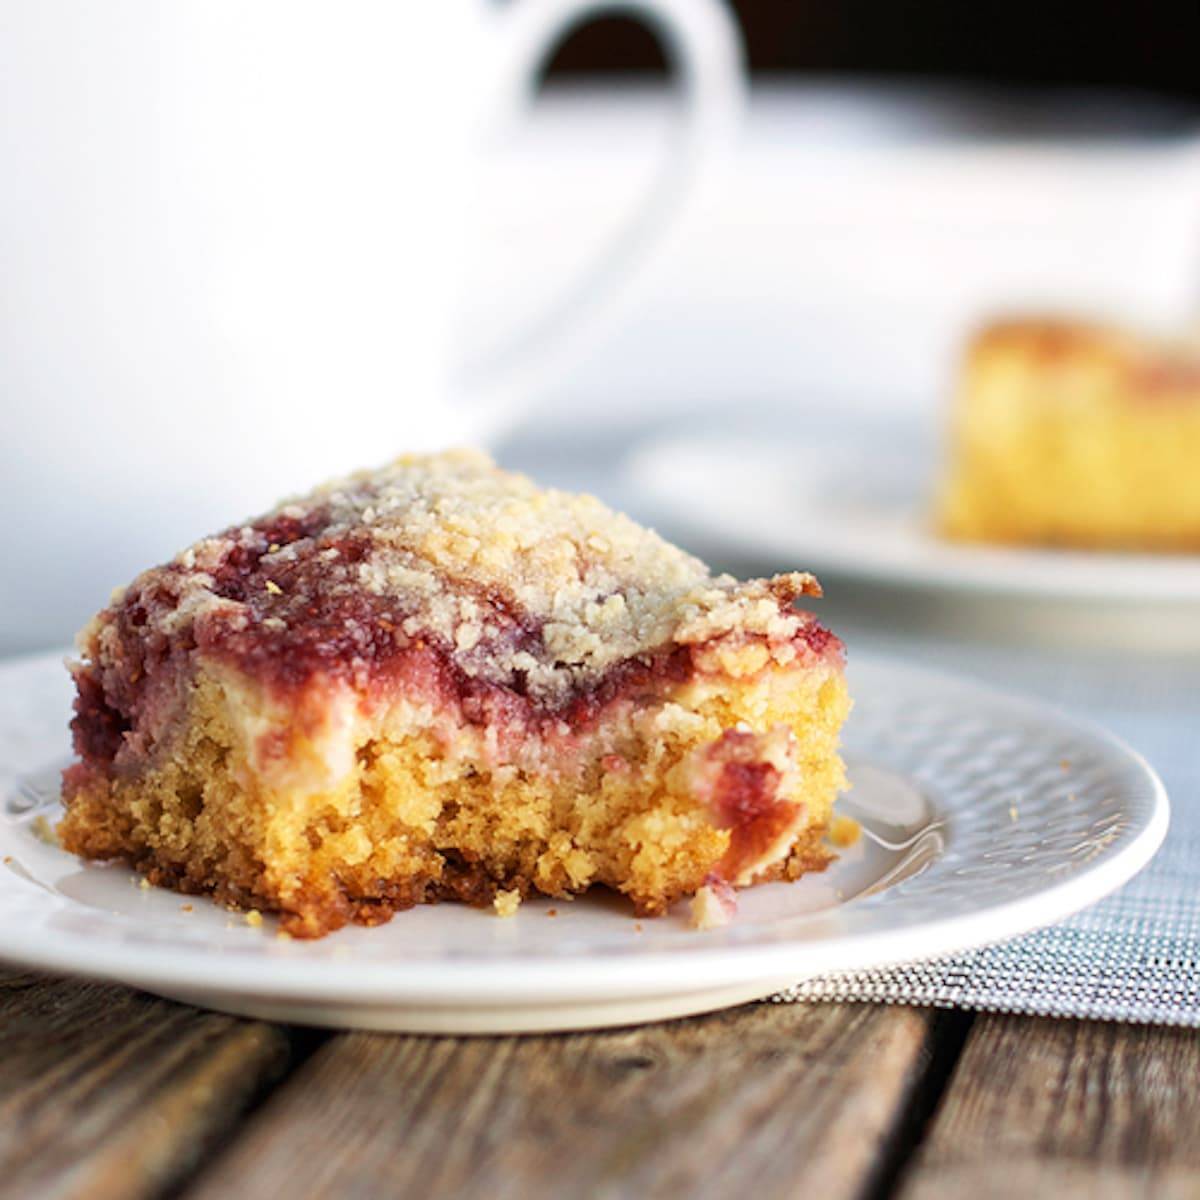 Raspberry cream cheese coffee cake with a bite taken out on a plate.